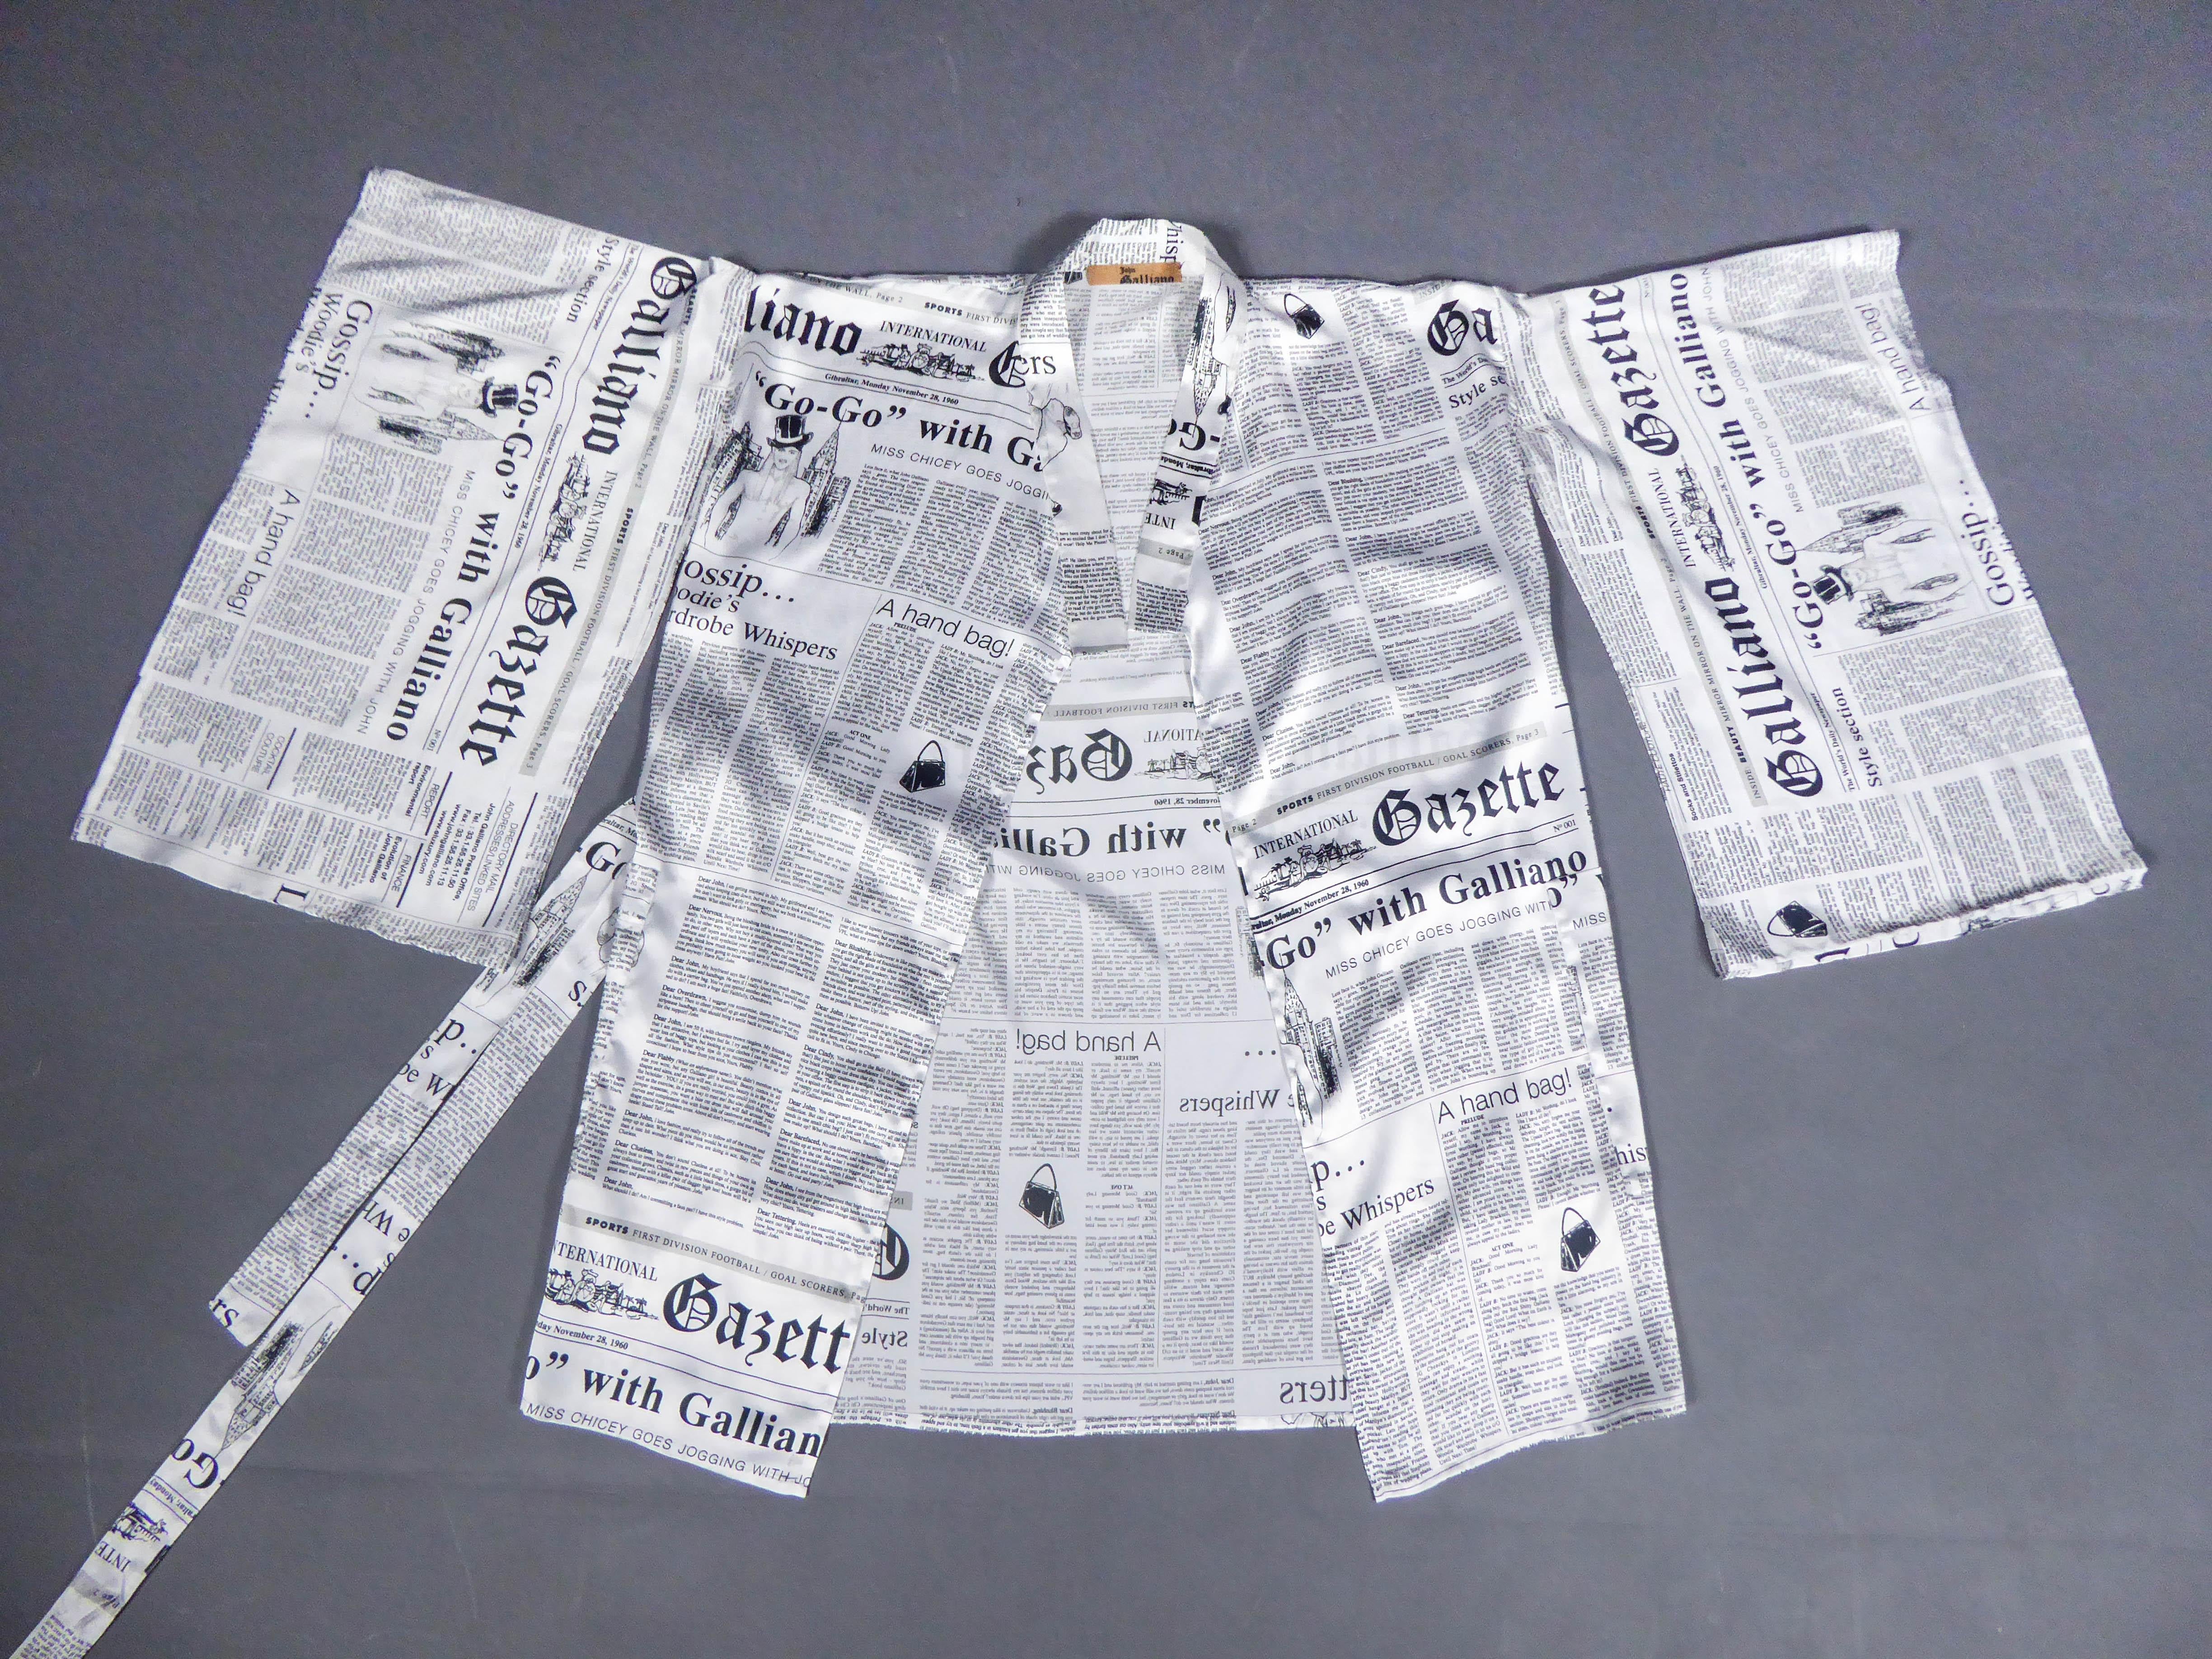 Circa 2000
France

Black and white printed satin kimono dress from John Galliano. White silk satin with humoristic print of newspapers detailing the creator's career, including his date of birth. Wide kimono sleeves and matching belt to tie. Label